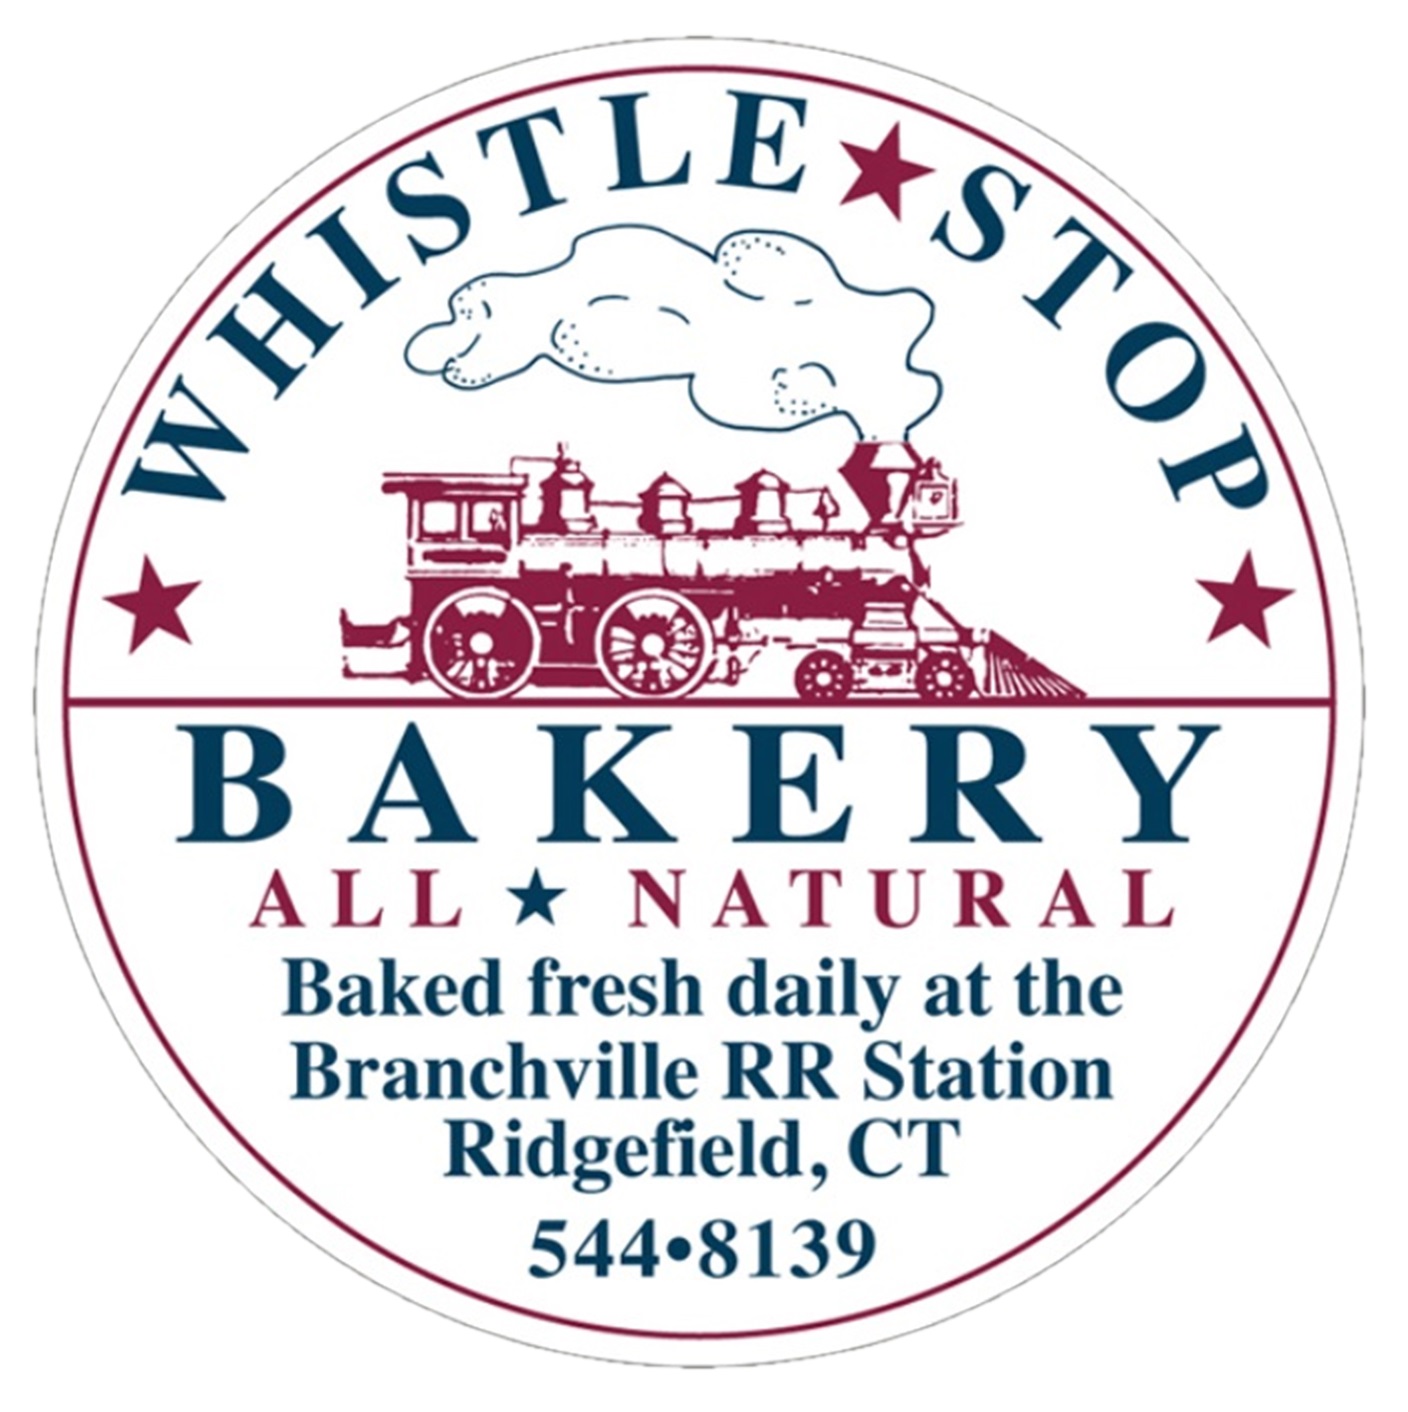 Whistle Stop Bakery